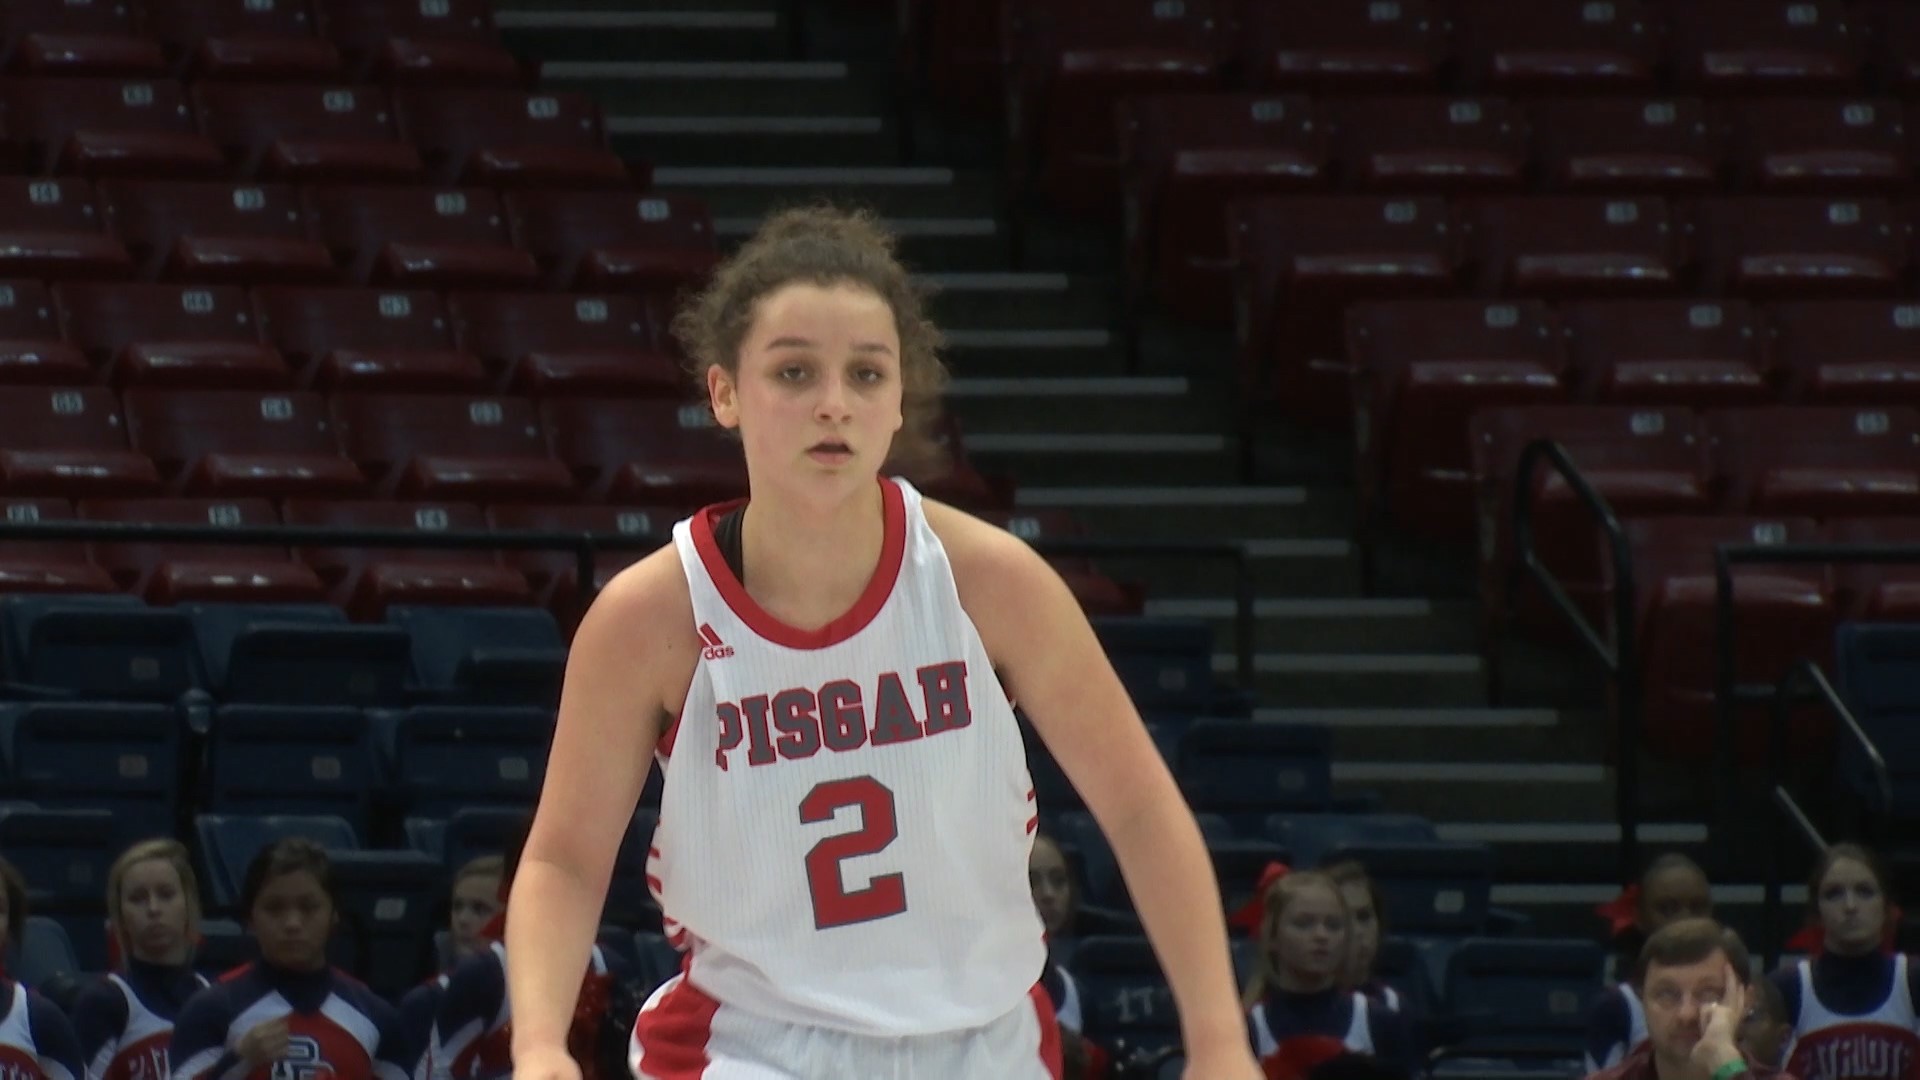 Pisgah’s Lady Eagles outscored Pike Road 29-14 in the third period Tuesday morning and advanced to the Class 3A state title game.